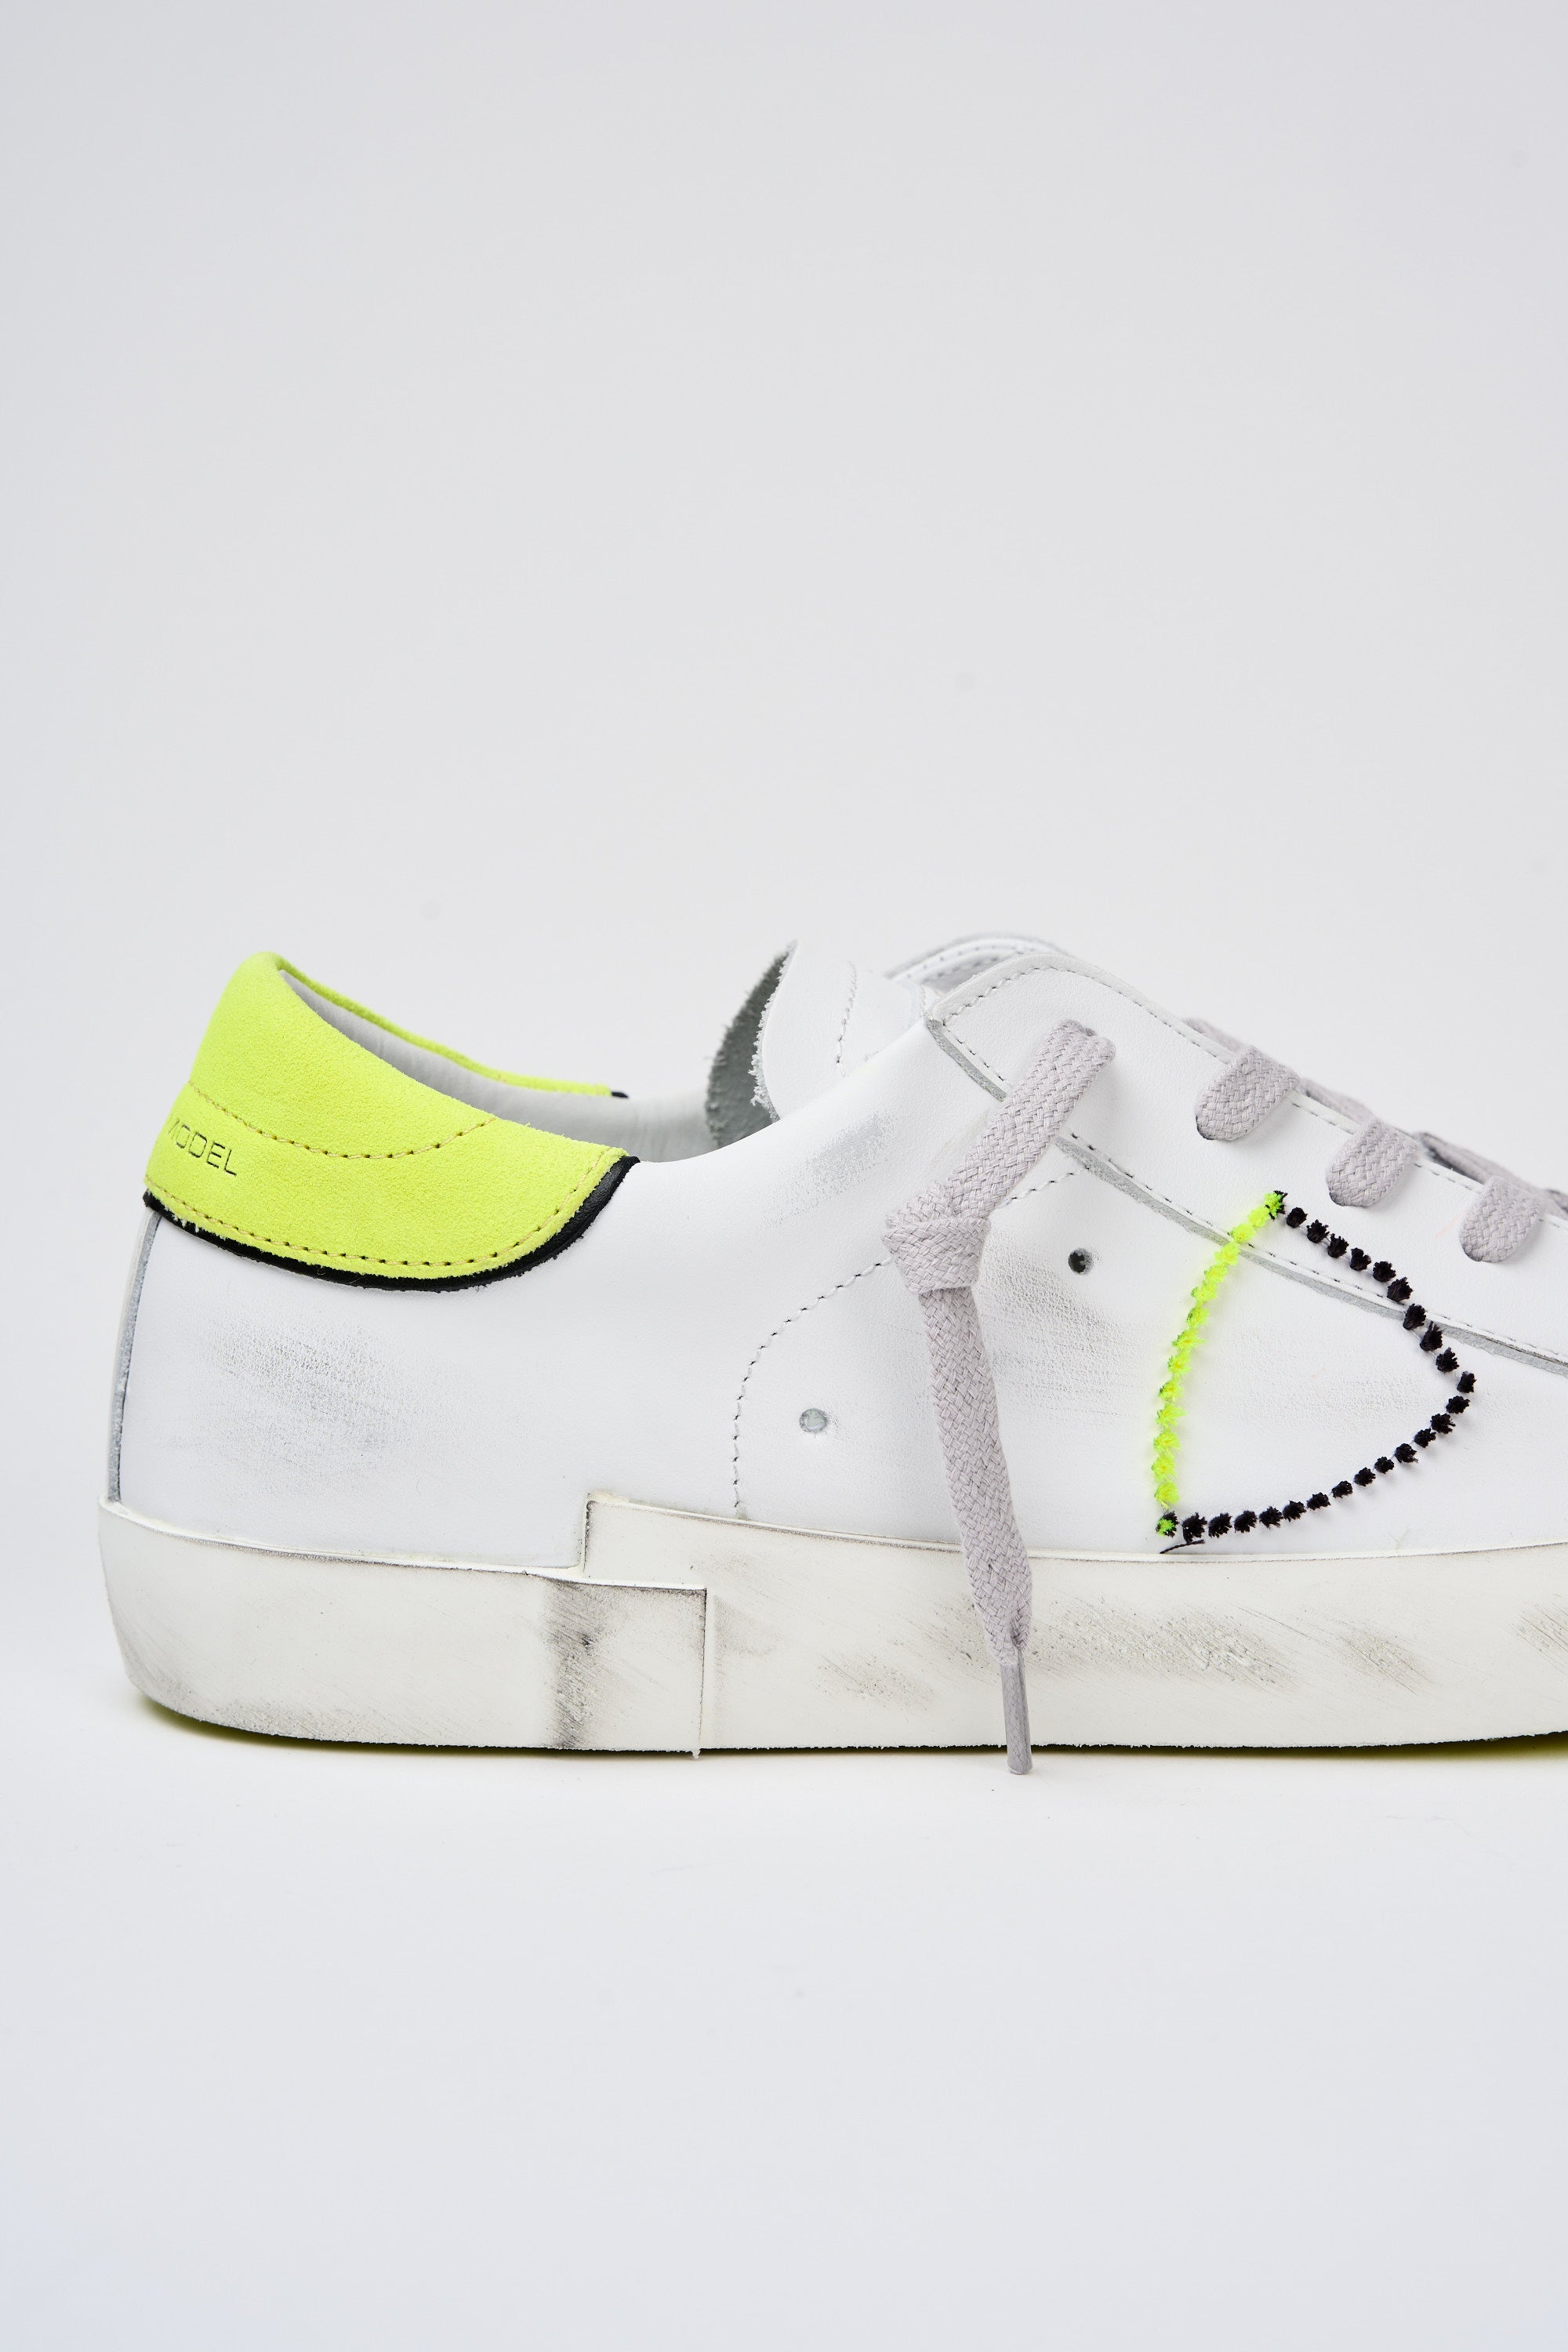 Philippe Model Sneaker Prsx Leather White/Yellow fluo-7